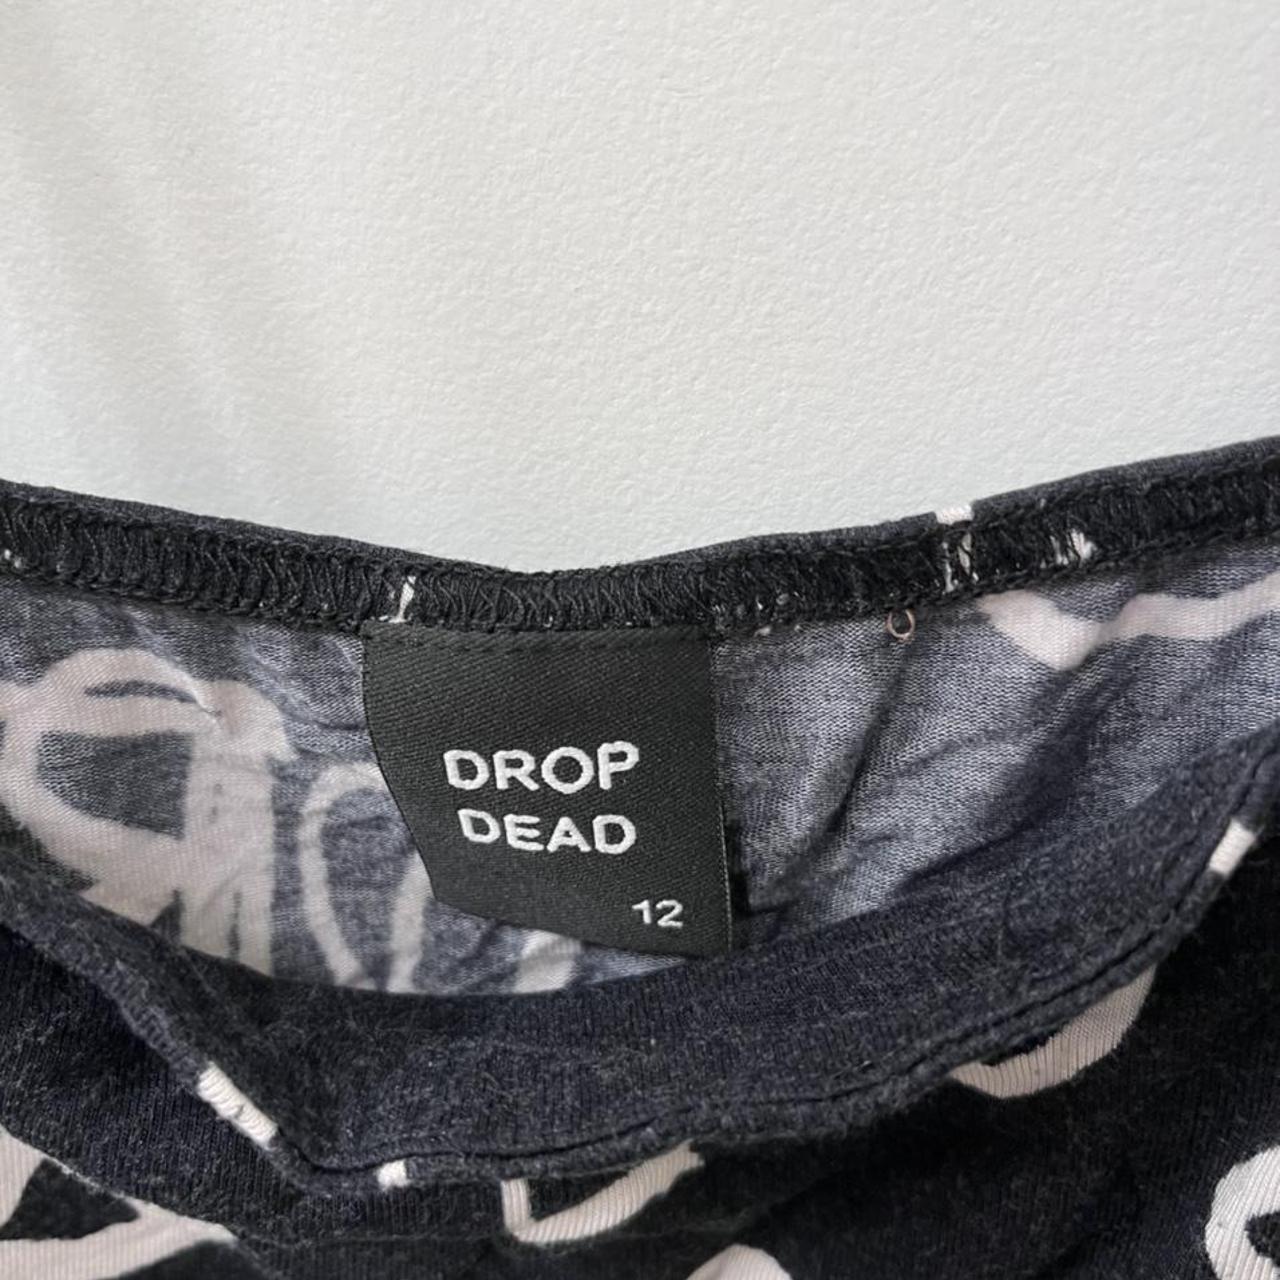 Dropdead Women's Black and White Crop-top (2)